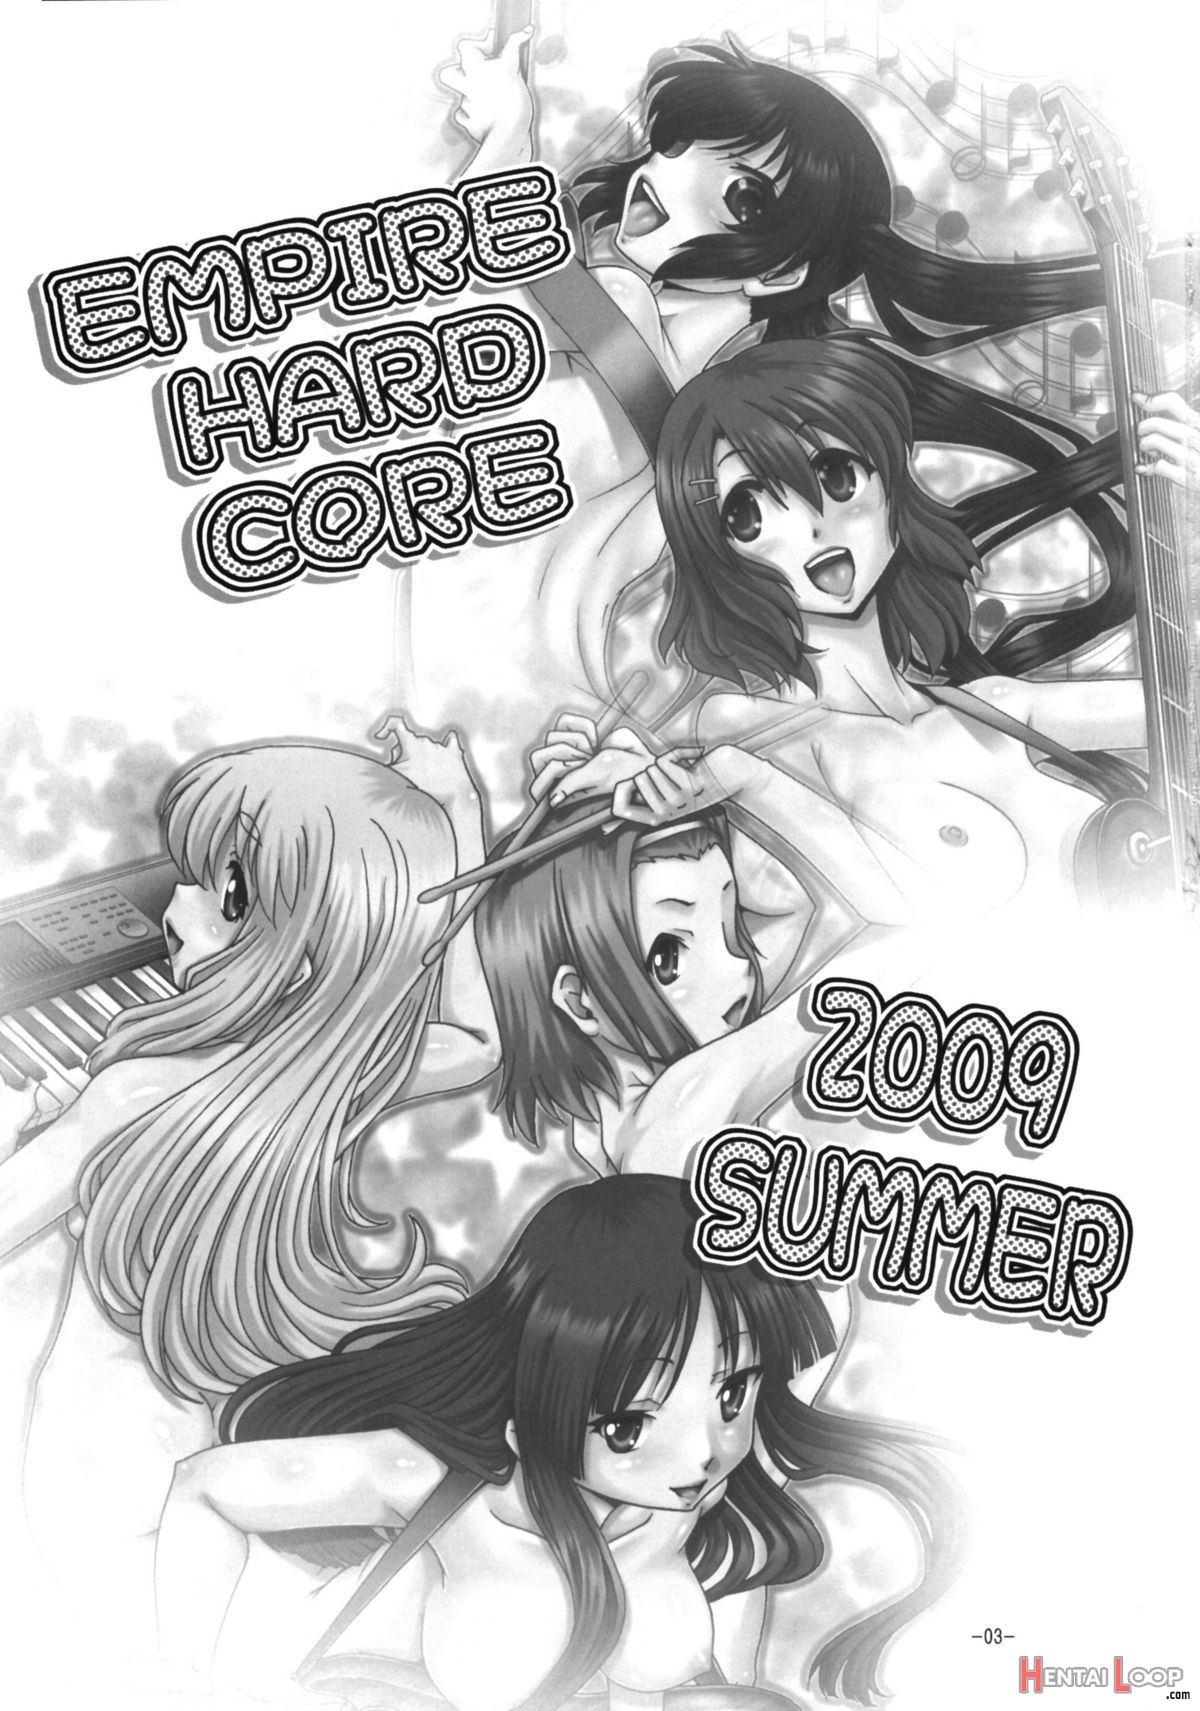 Empire Hard Core 2009 Summer page 2